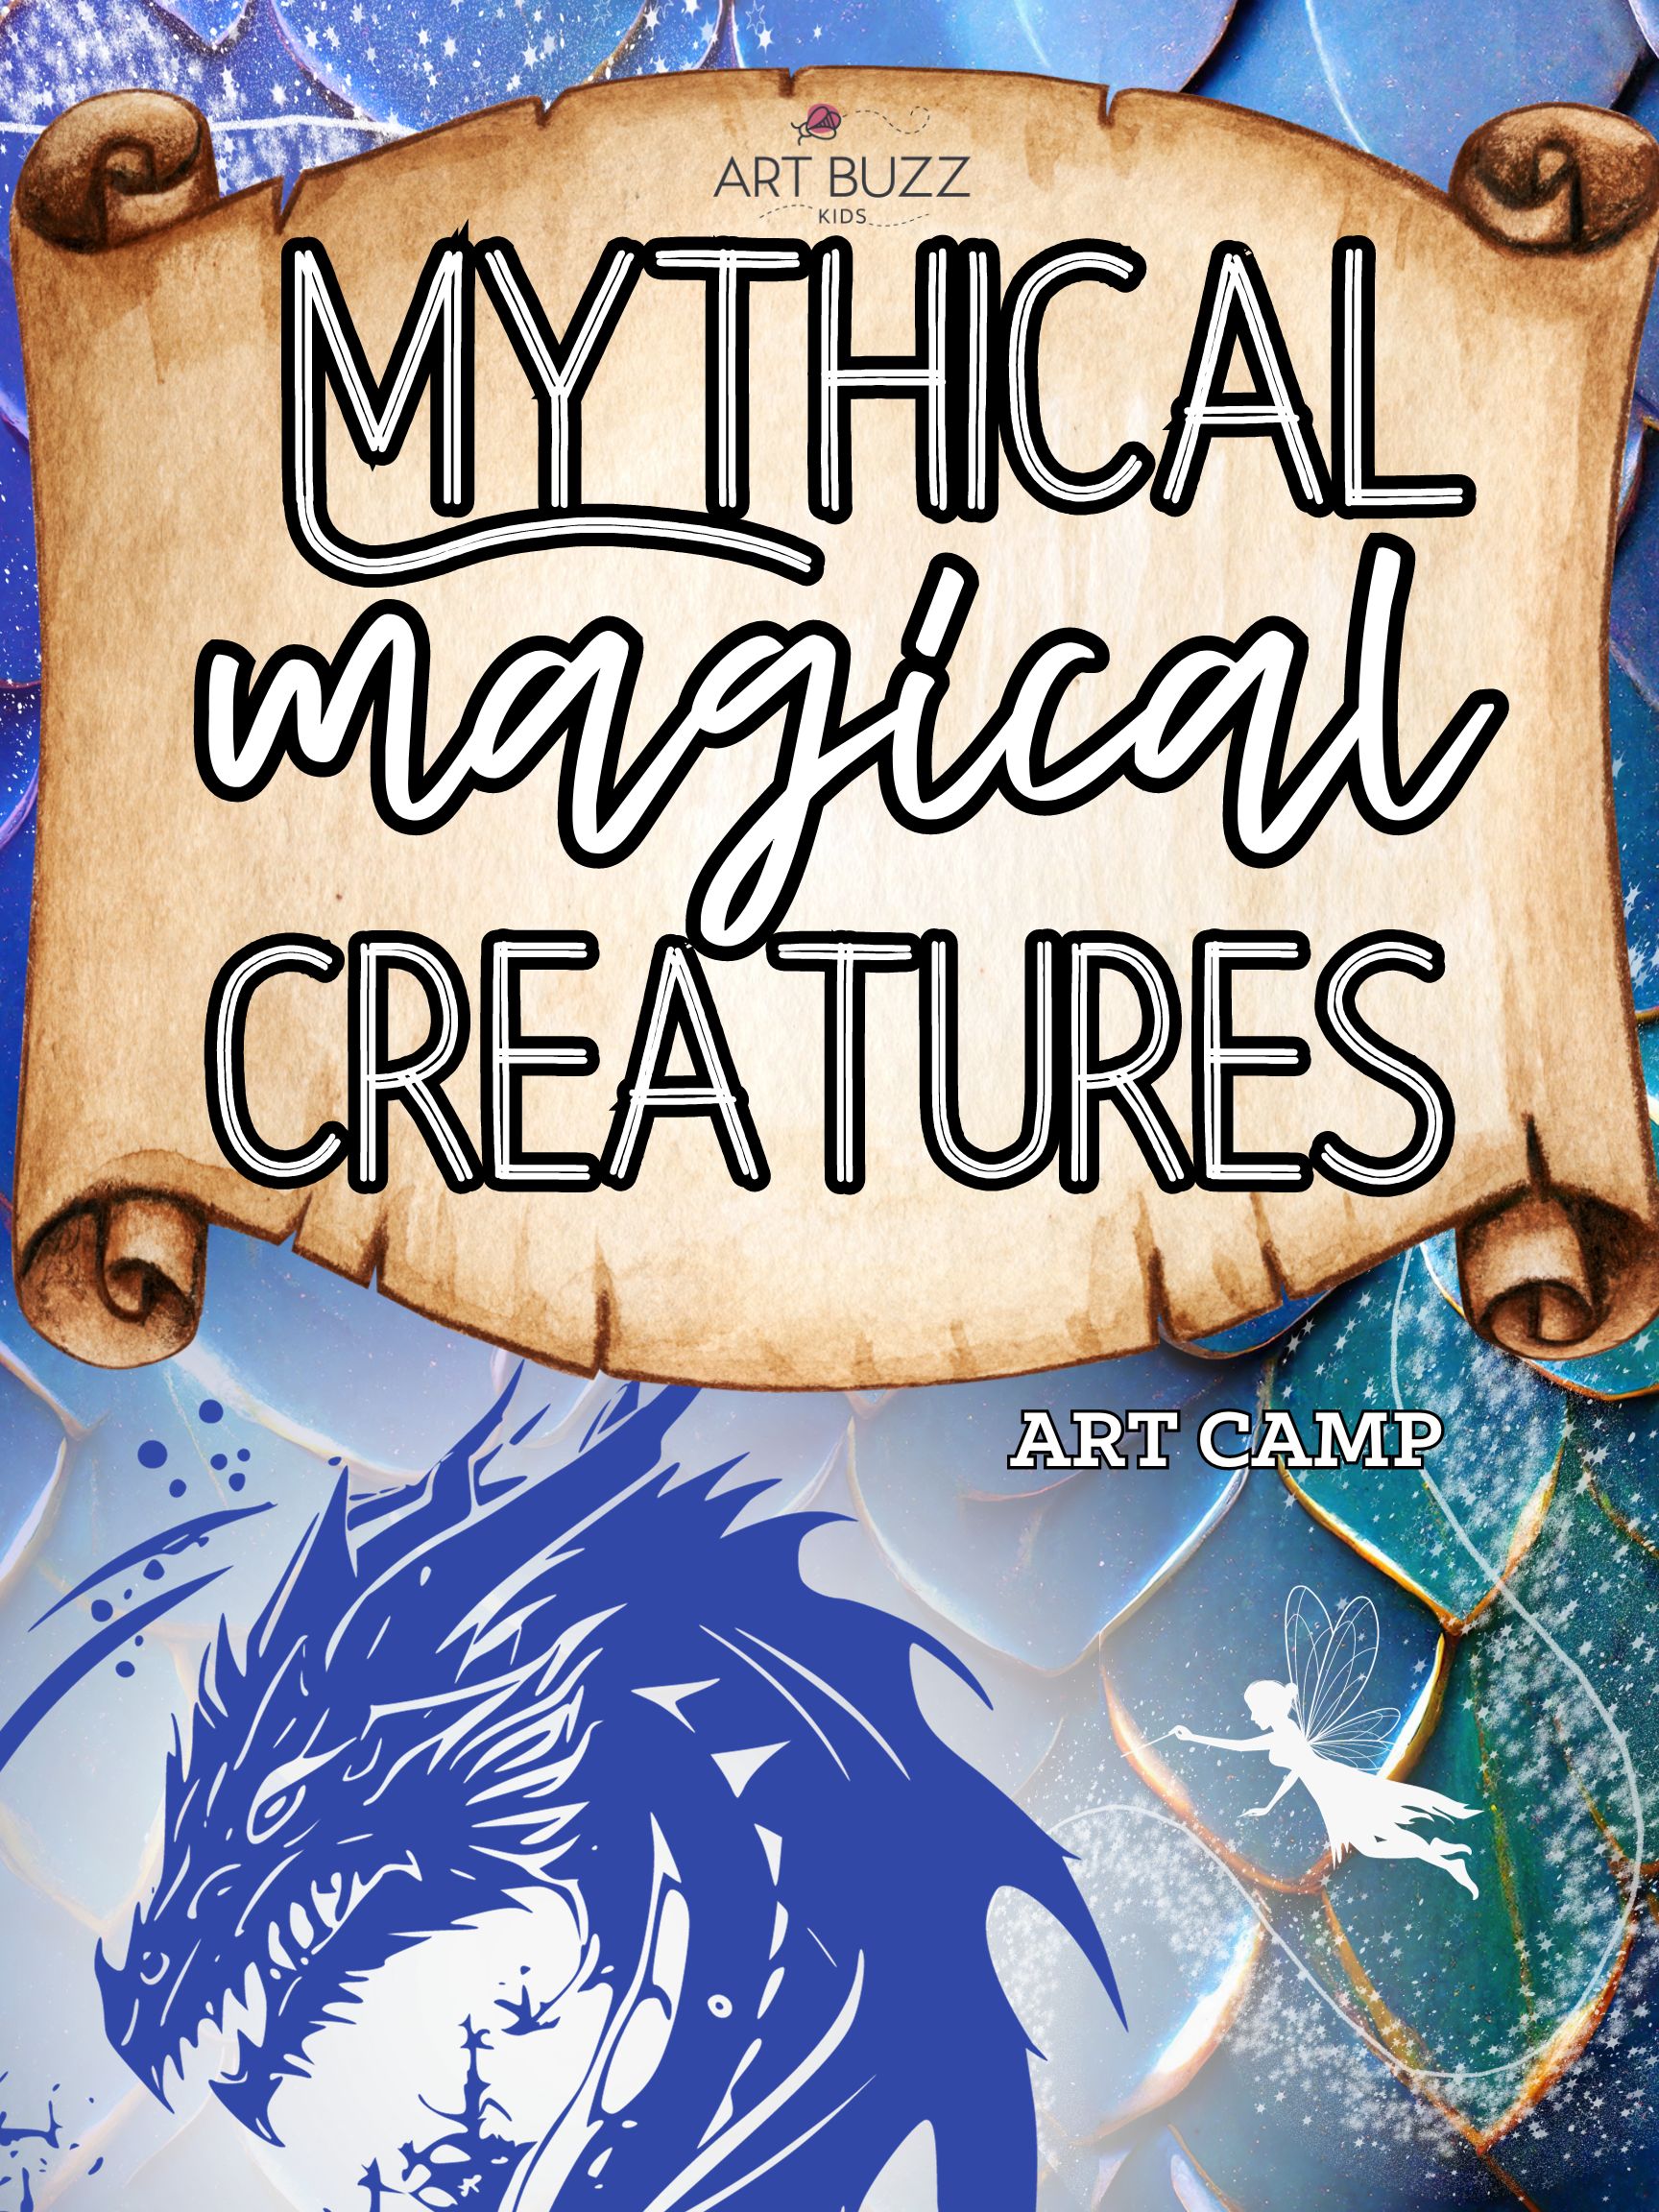 1 Day Mythical, Magical Creatures Art Camp 8:30am to 12:30pm